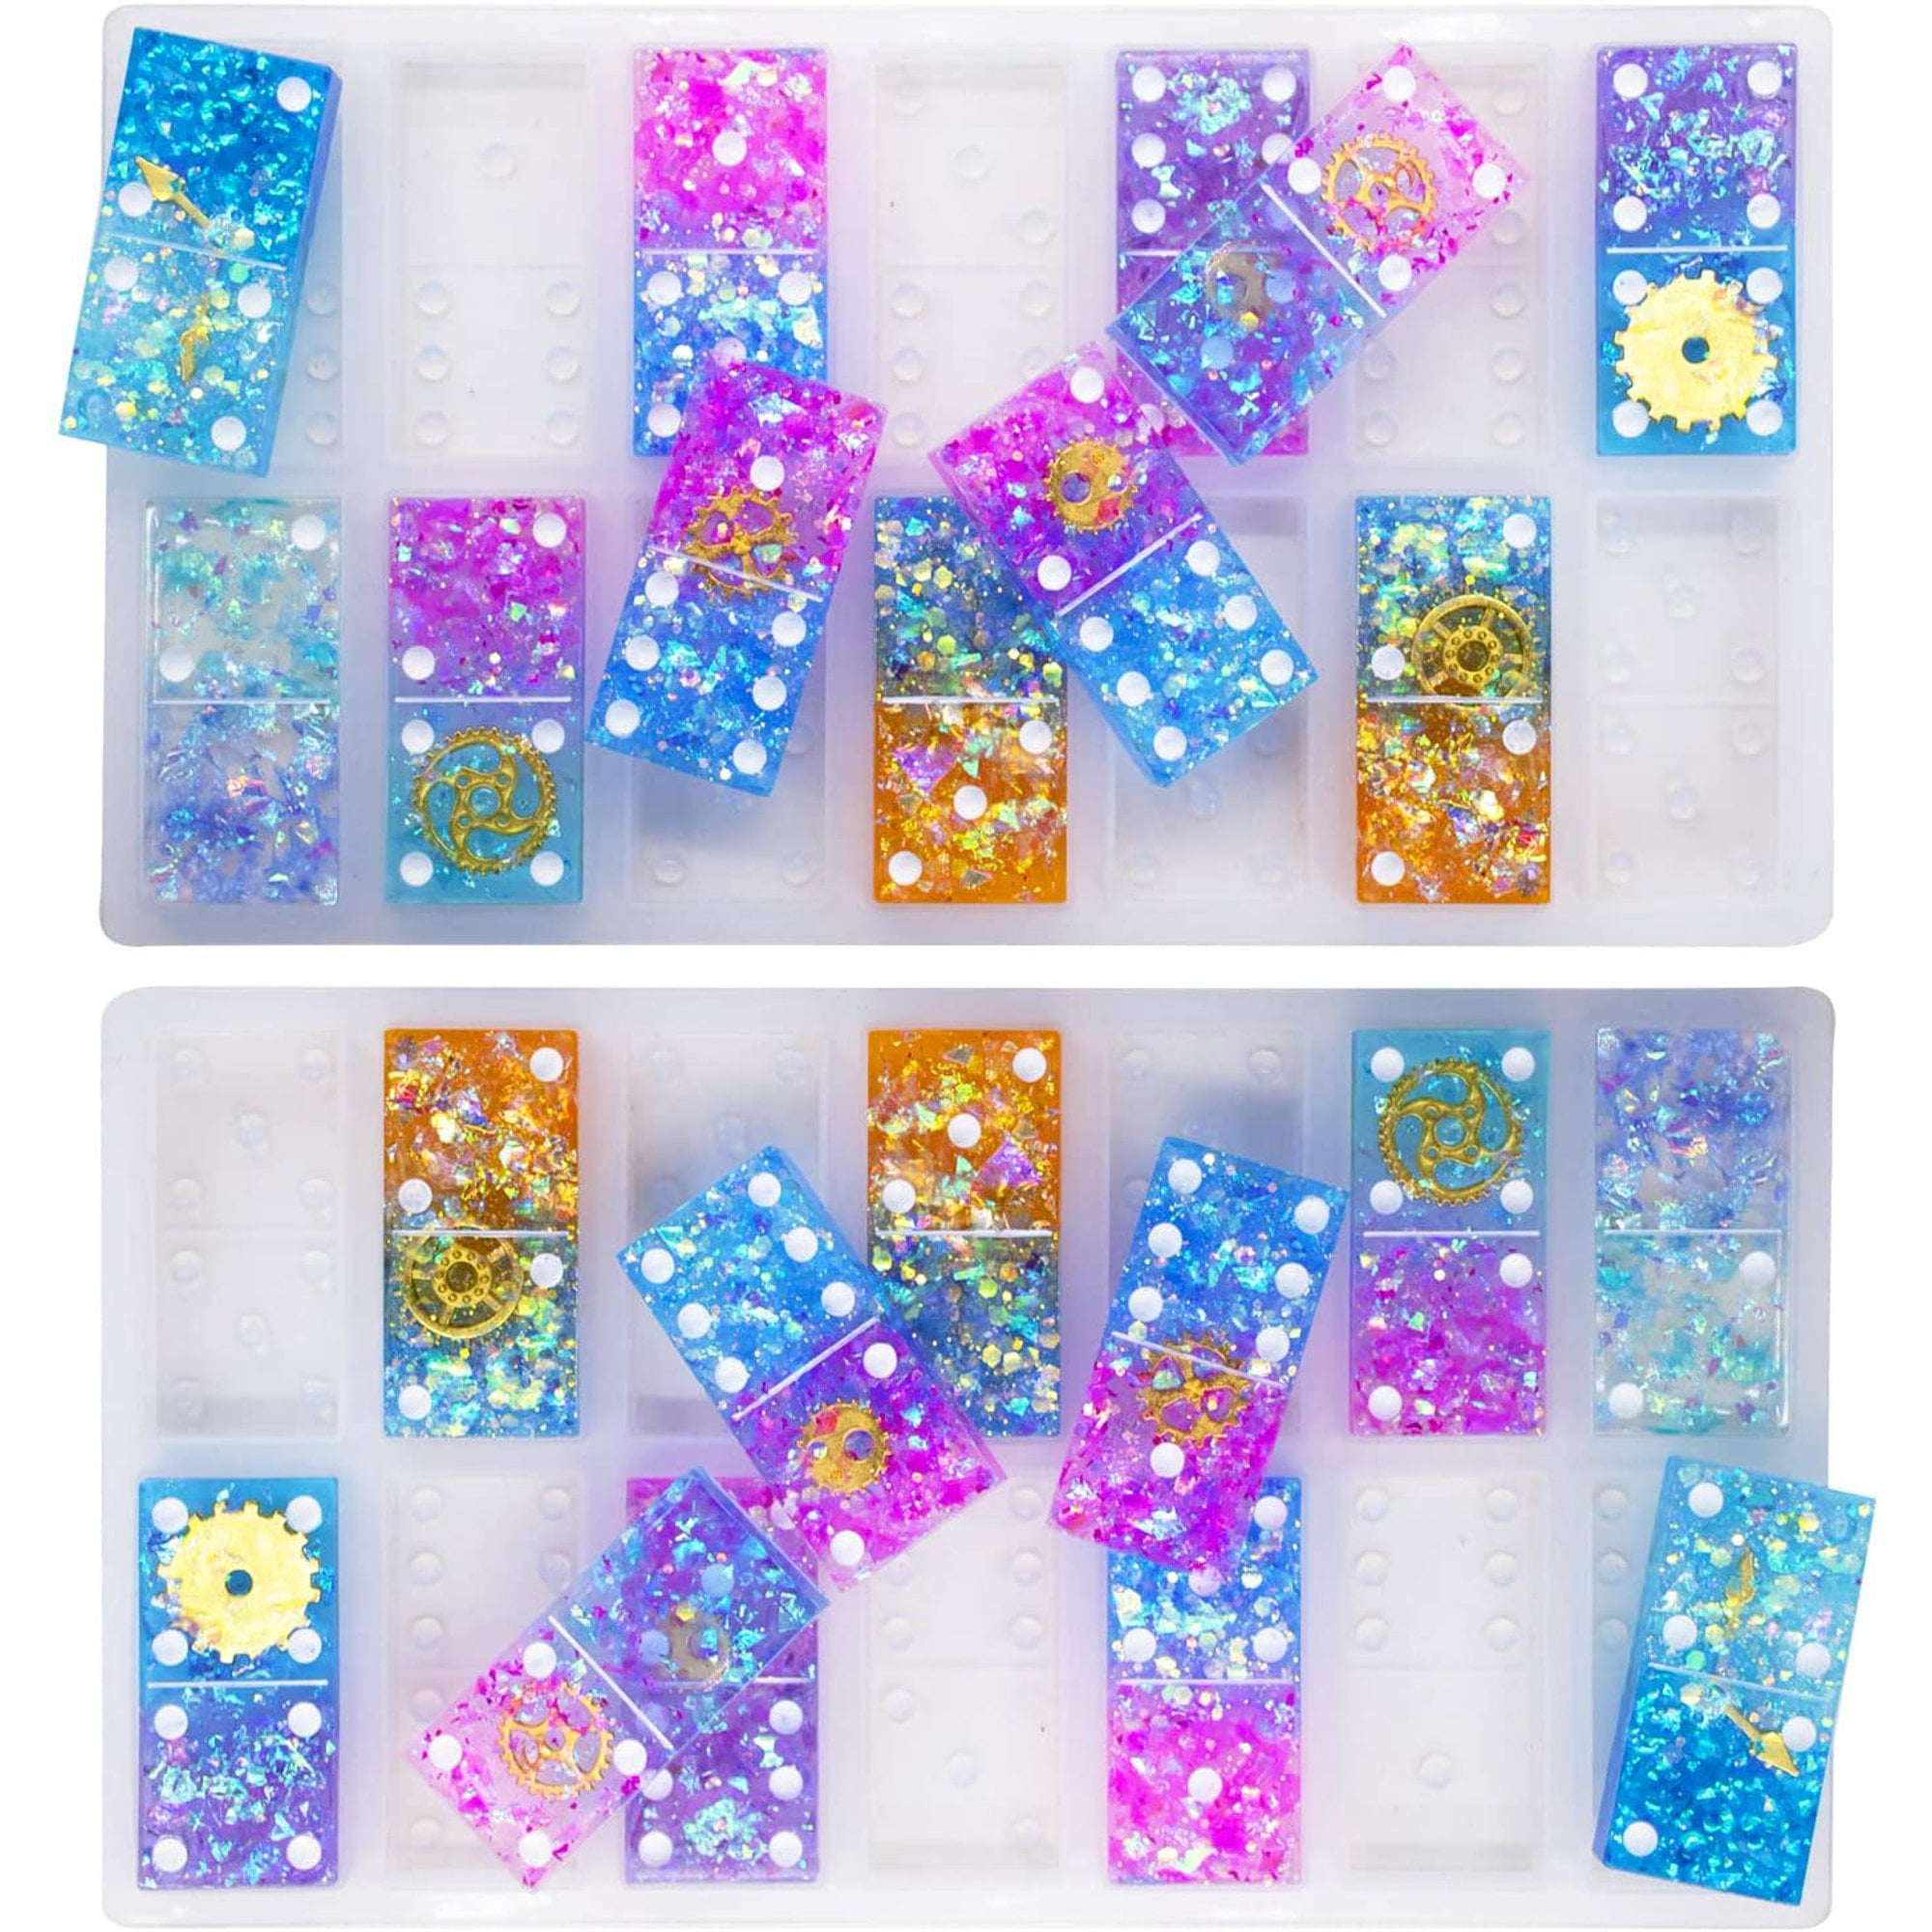 1pc 28 Square Silicone Mold For Dominoes, Resin Dropping & Crystal Glue Mold  For Diy Cute Cartoon Patterns, Suitable For Kids' Play And Early  Mathematics Education Learning Toys